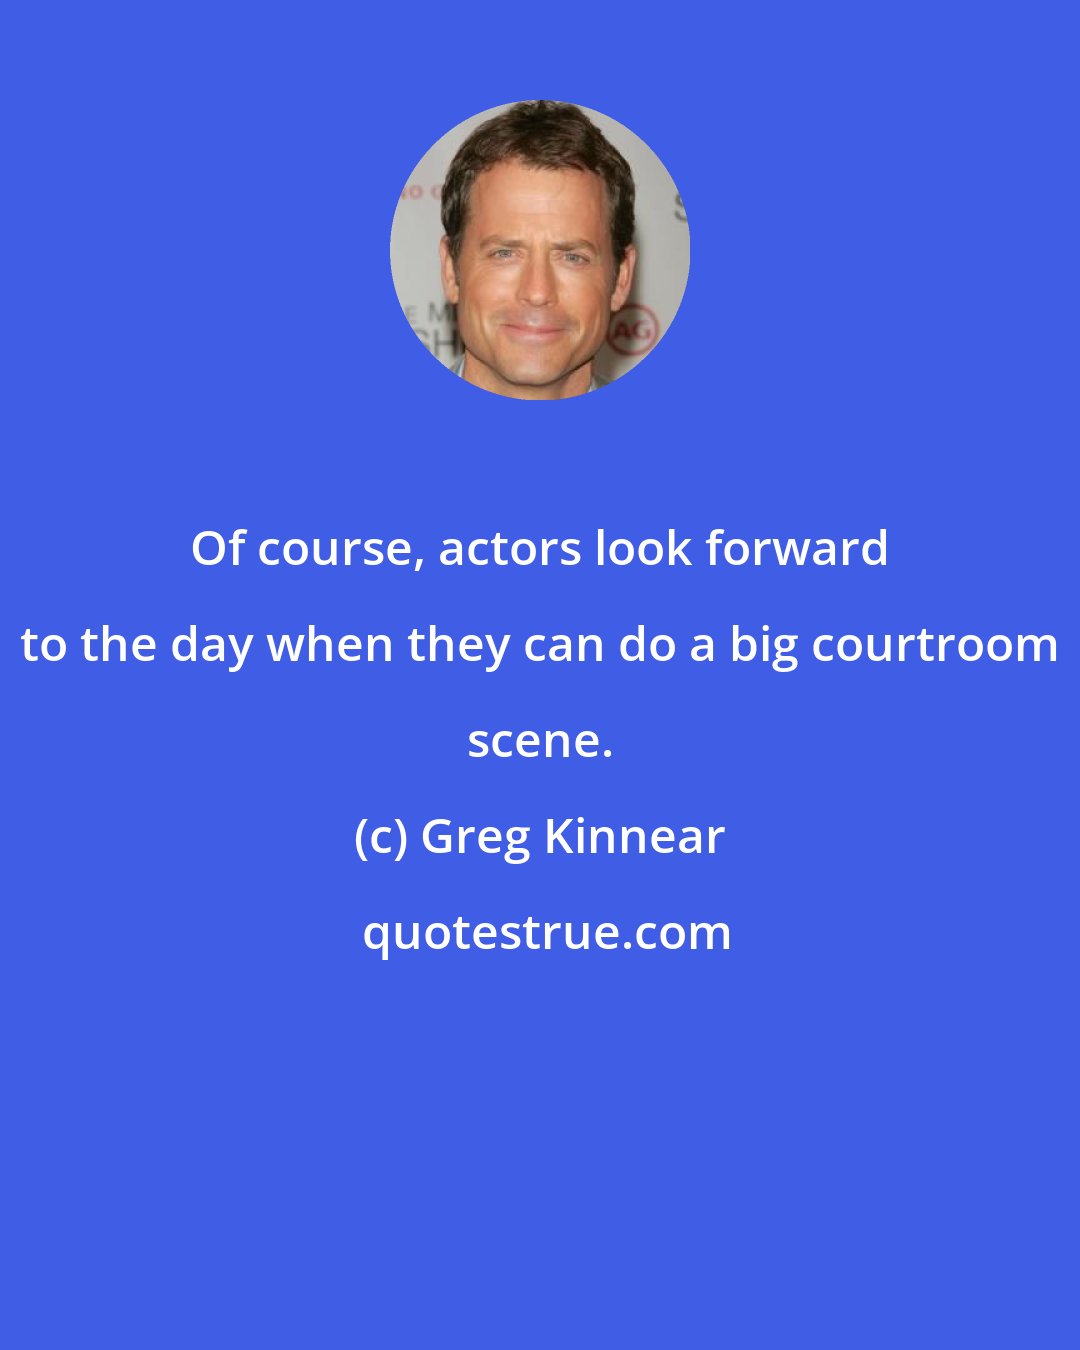 Greg Kinnear: Of course, actors look forward to the day when they can do a big courtroom scene.